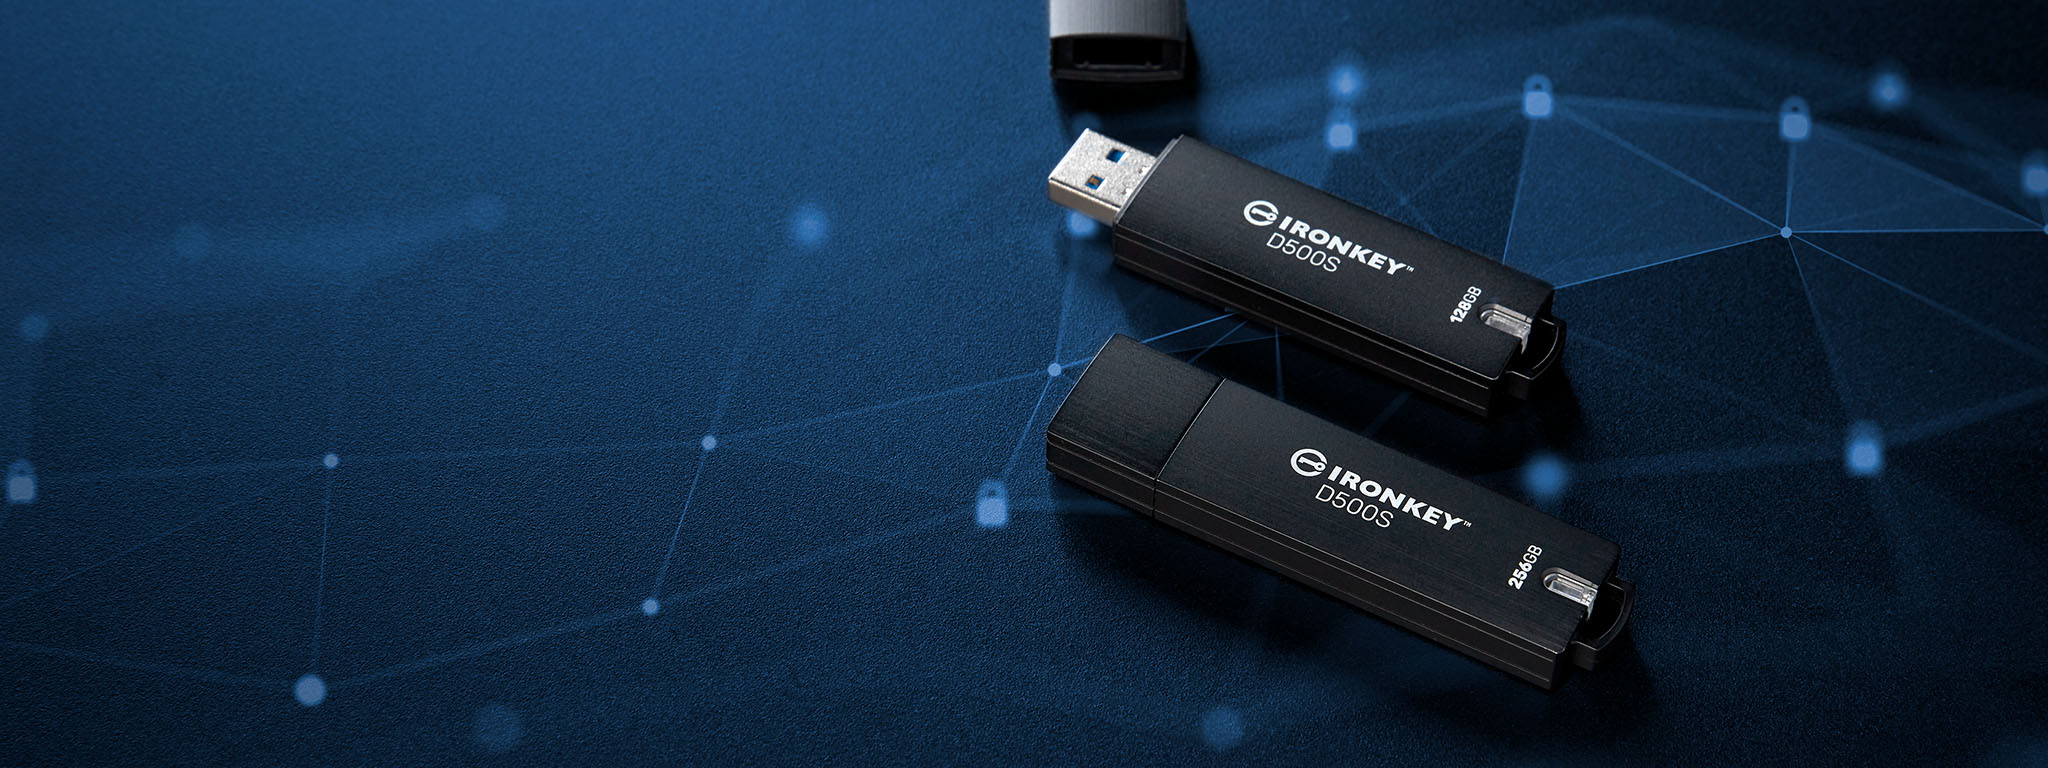 A pair of IronKey D500S USB flash drives sit on a black surface with lock icon graphics in blue